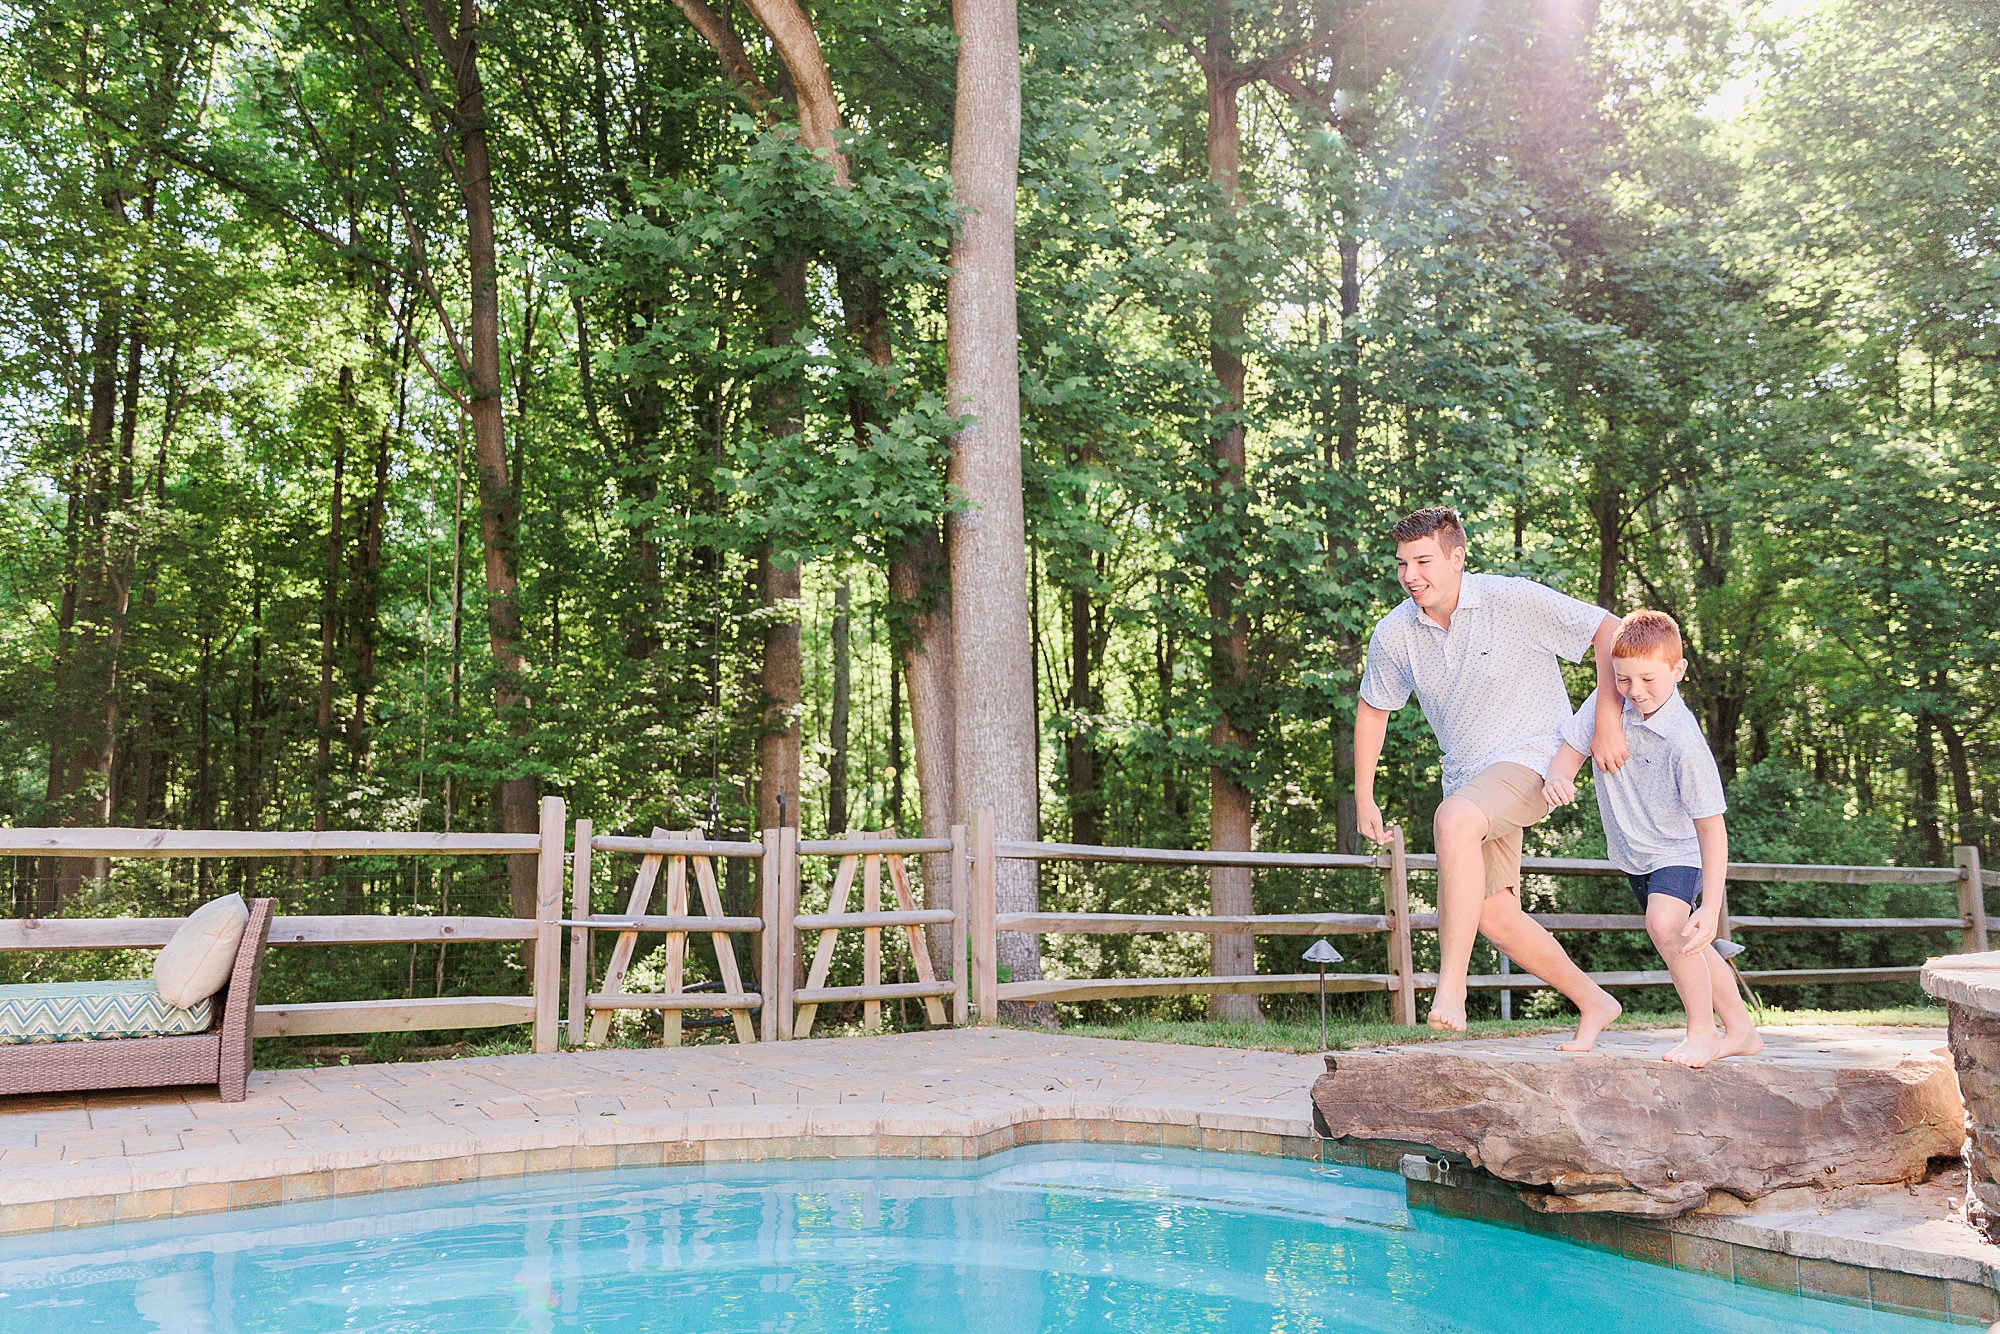 boys jump into pool during Maryland summer time photos 